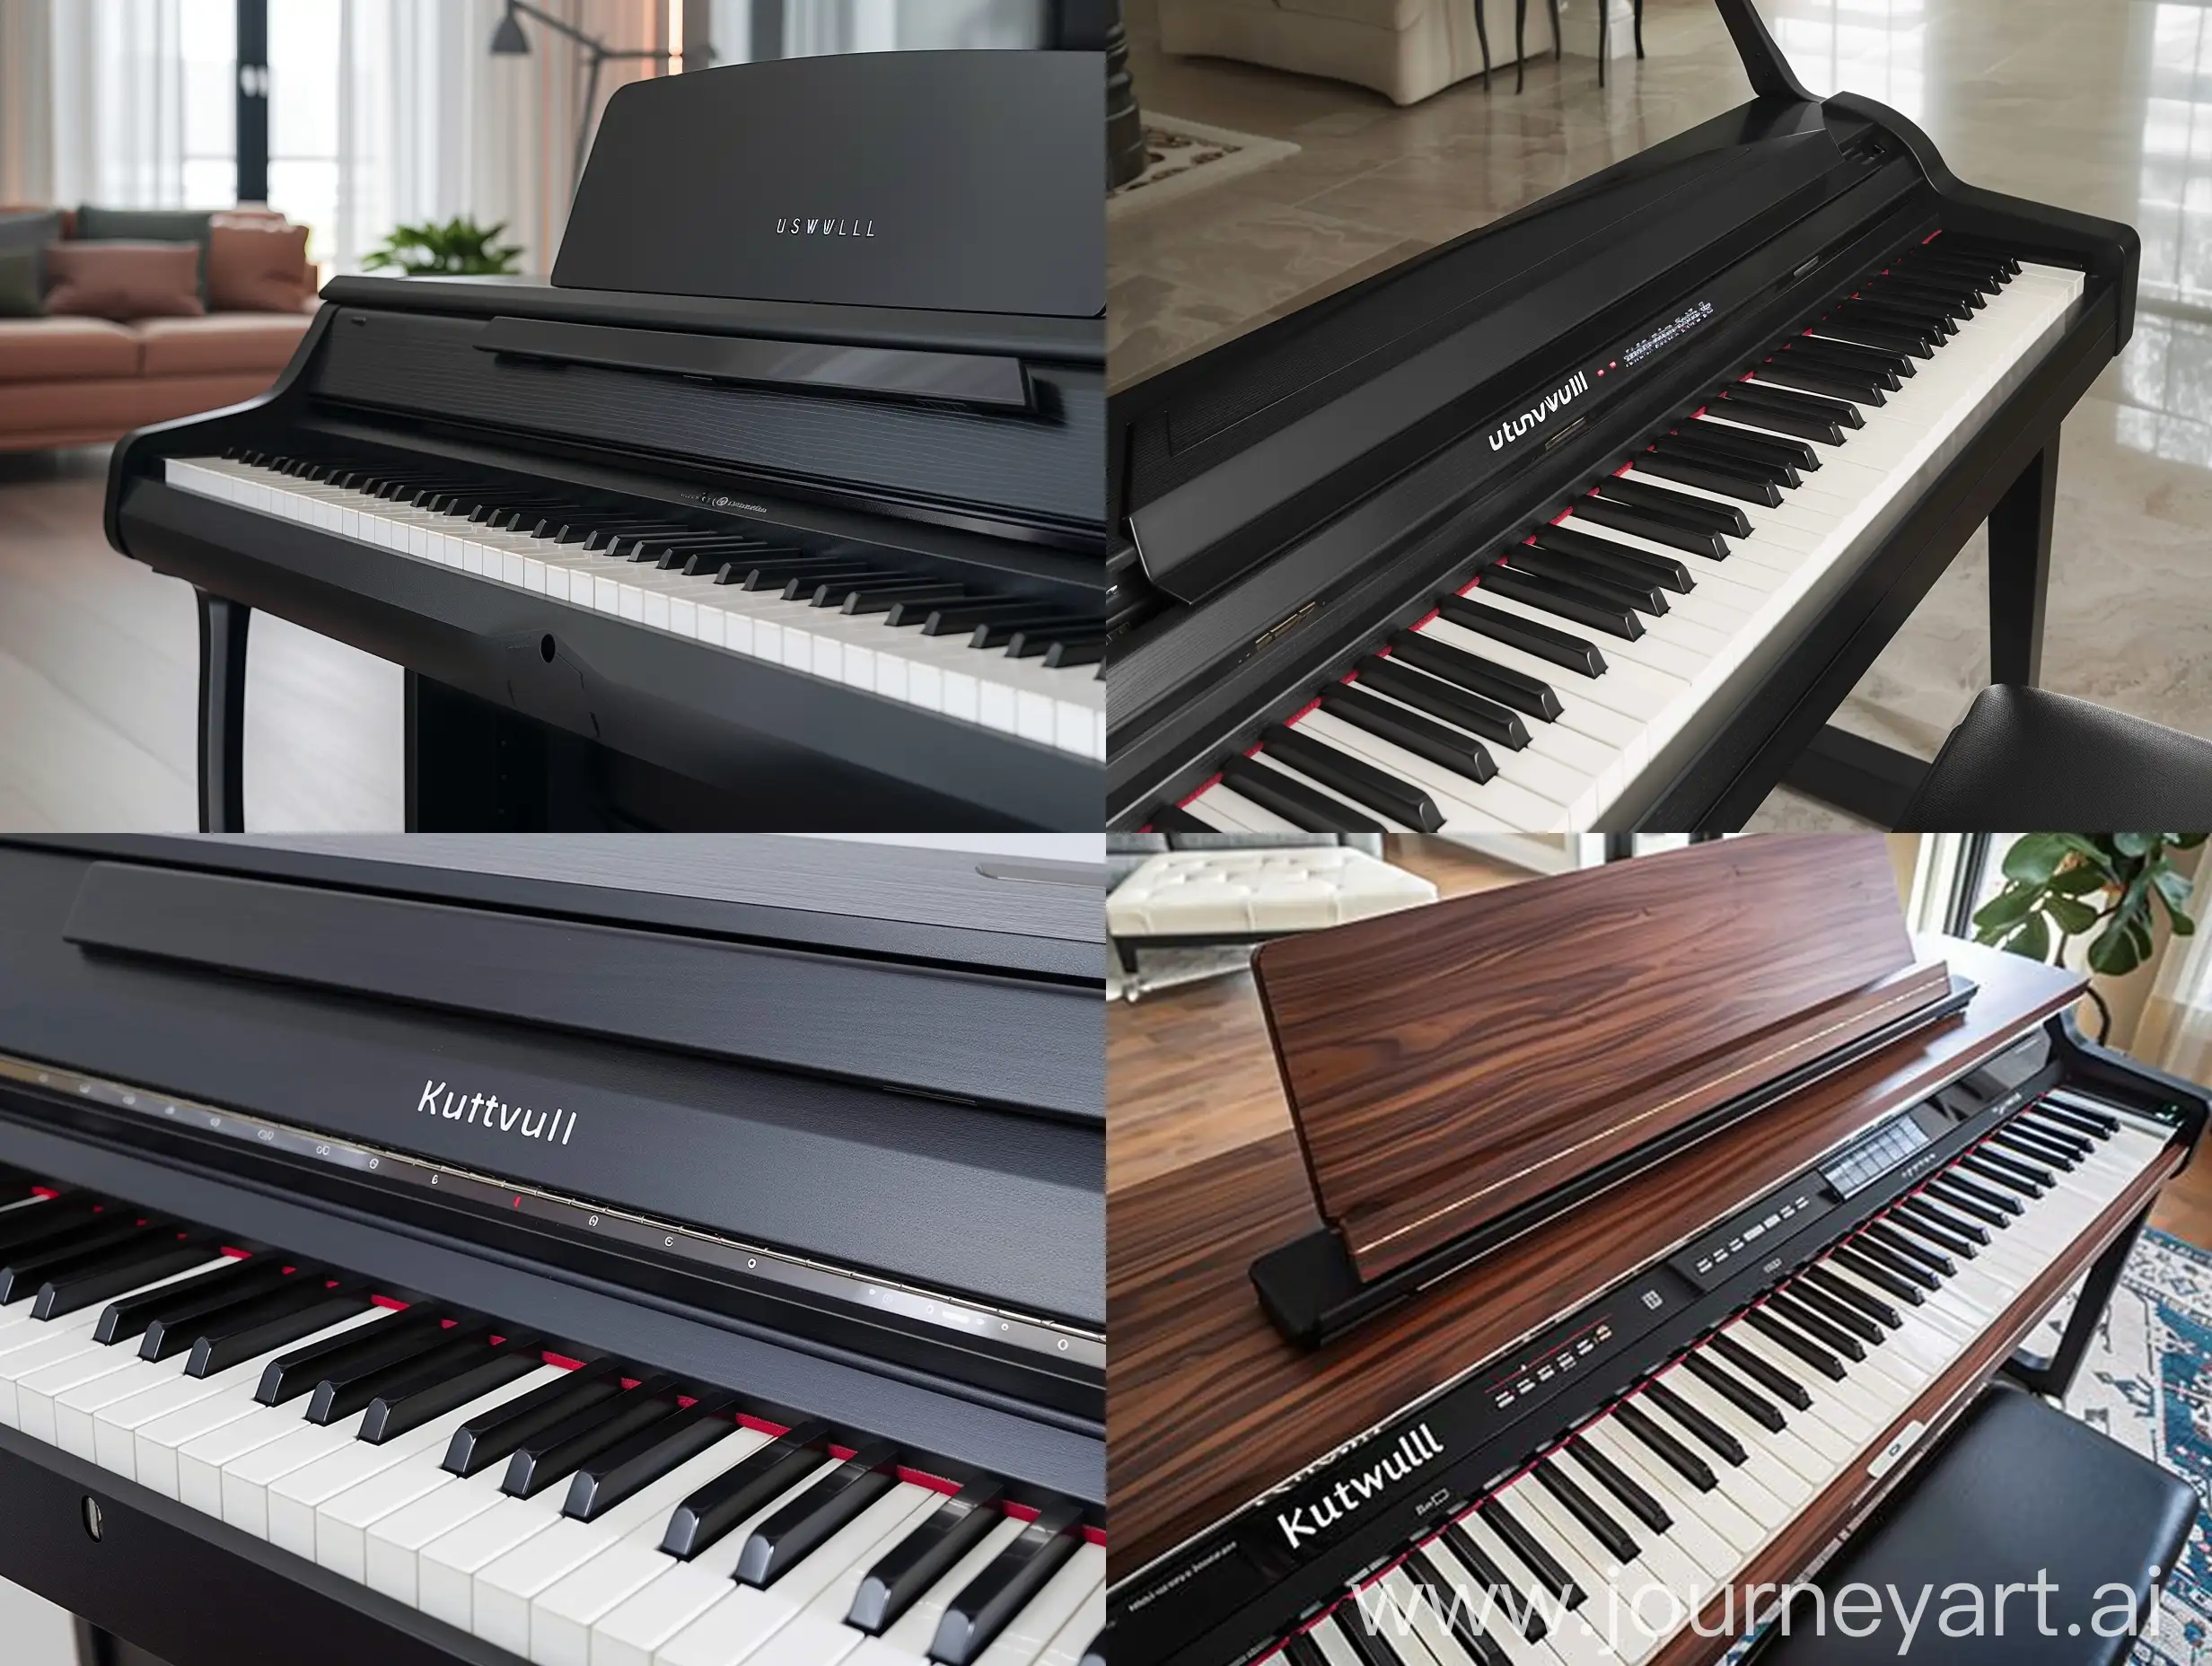 Kurzweil-230-Digital-Piano-in-Home-Setting-with-Furniture